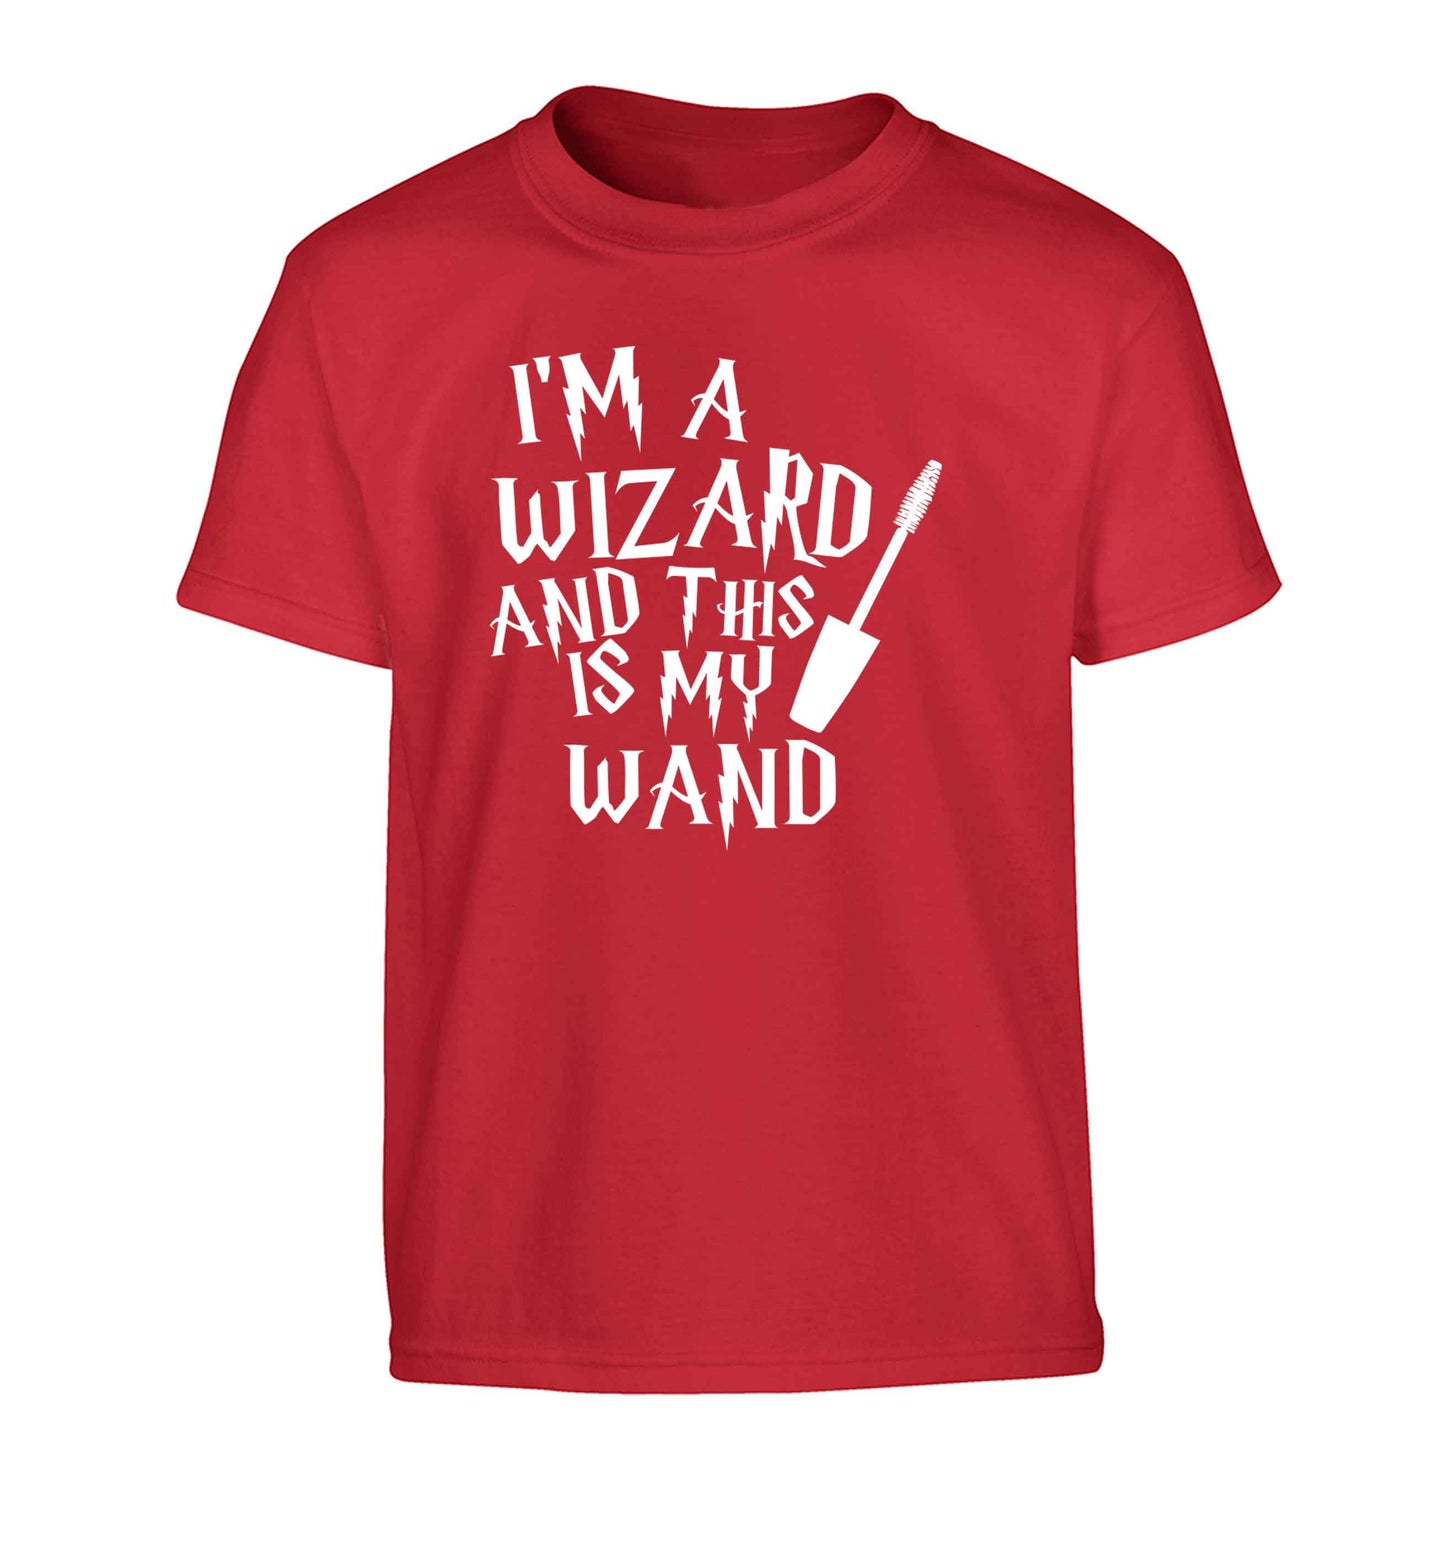 I'm a wizard and this is my wand Children's red Tshirt 12-13 Years